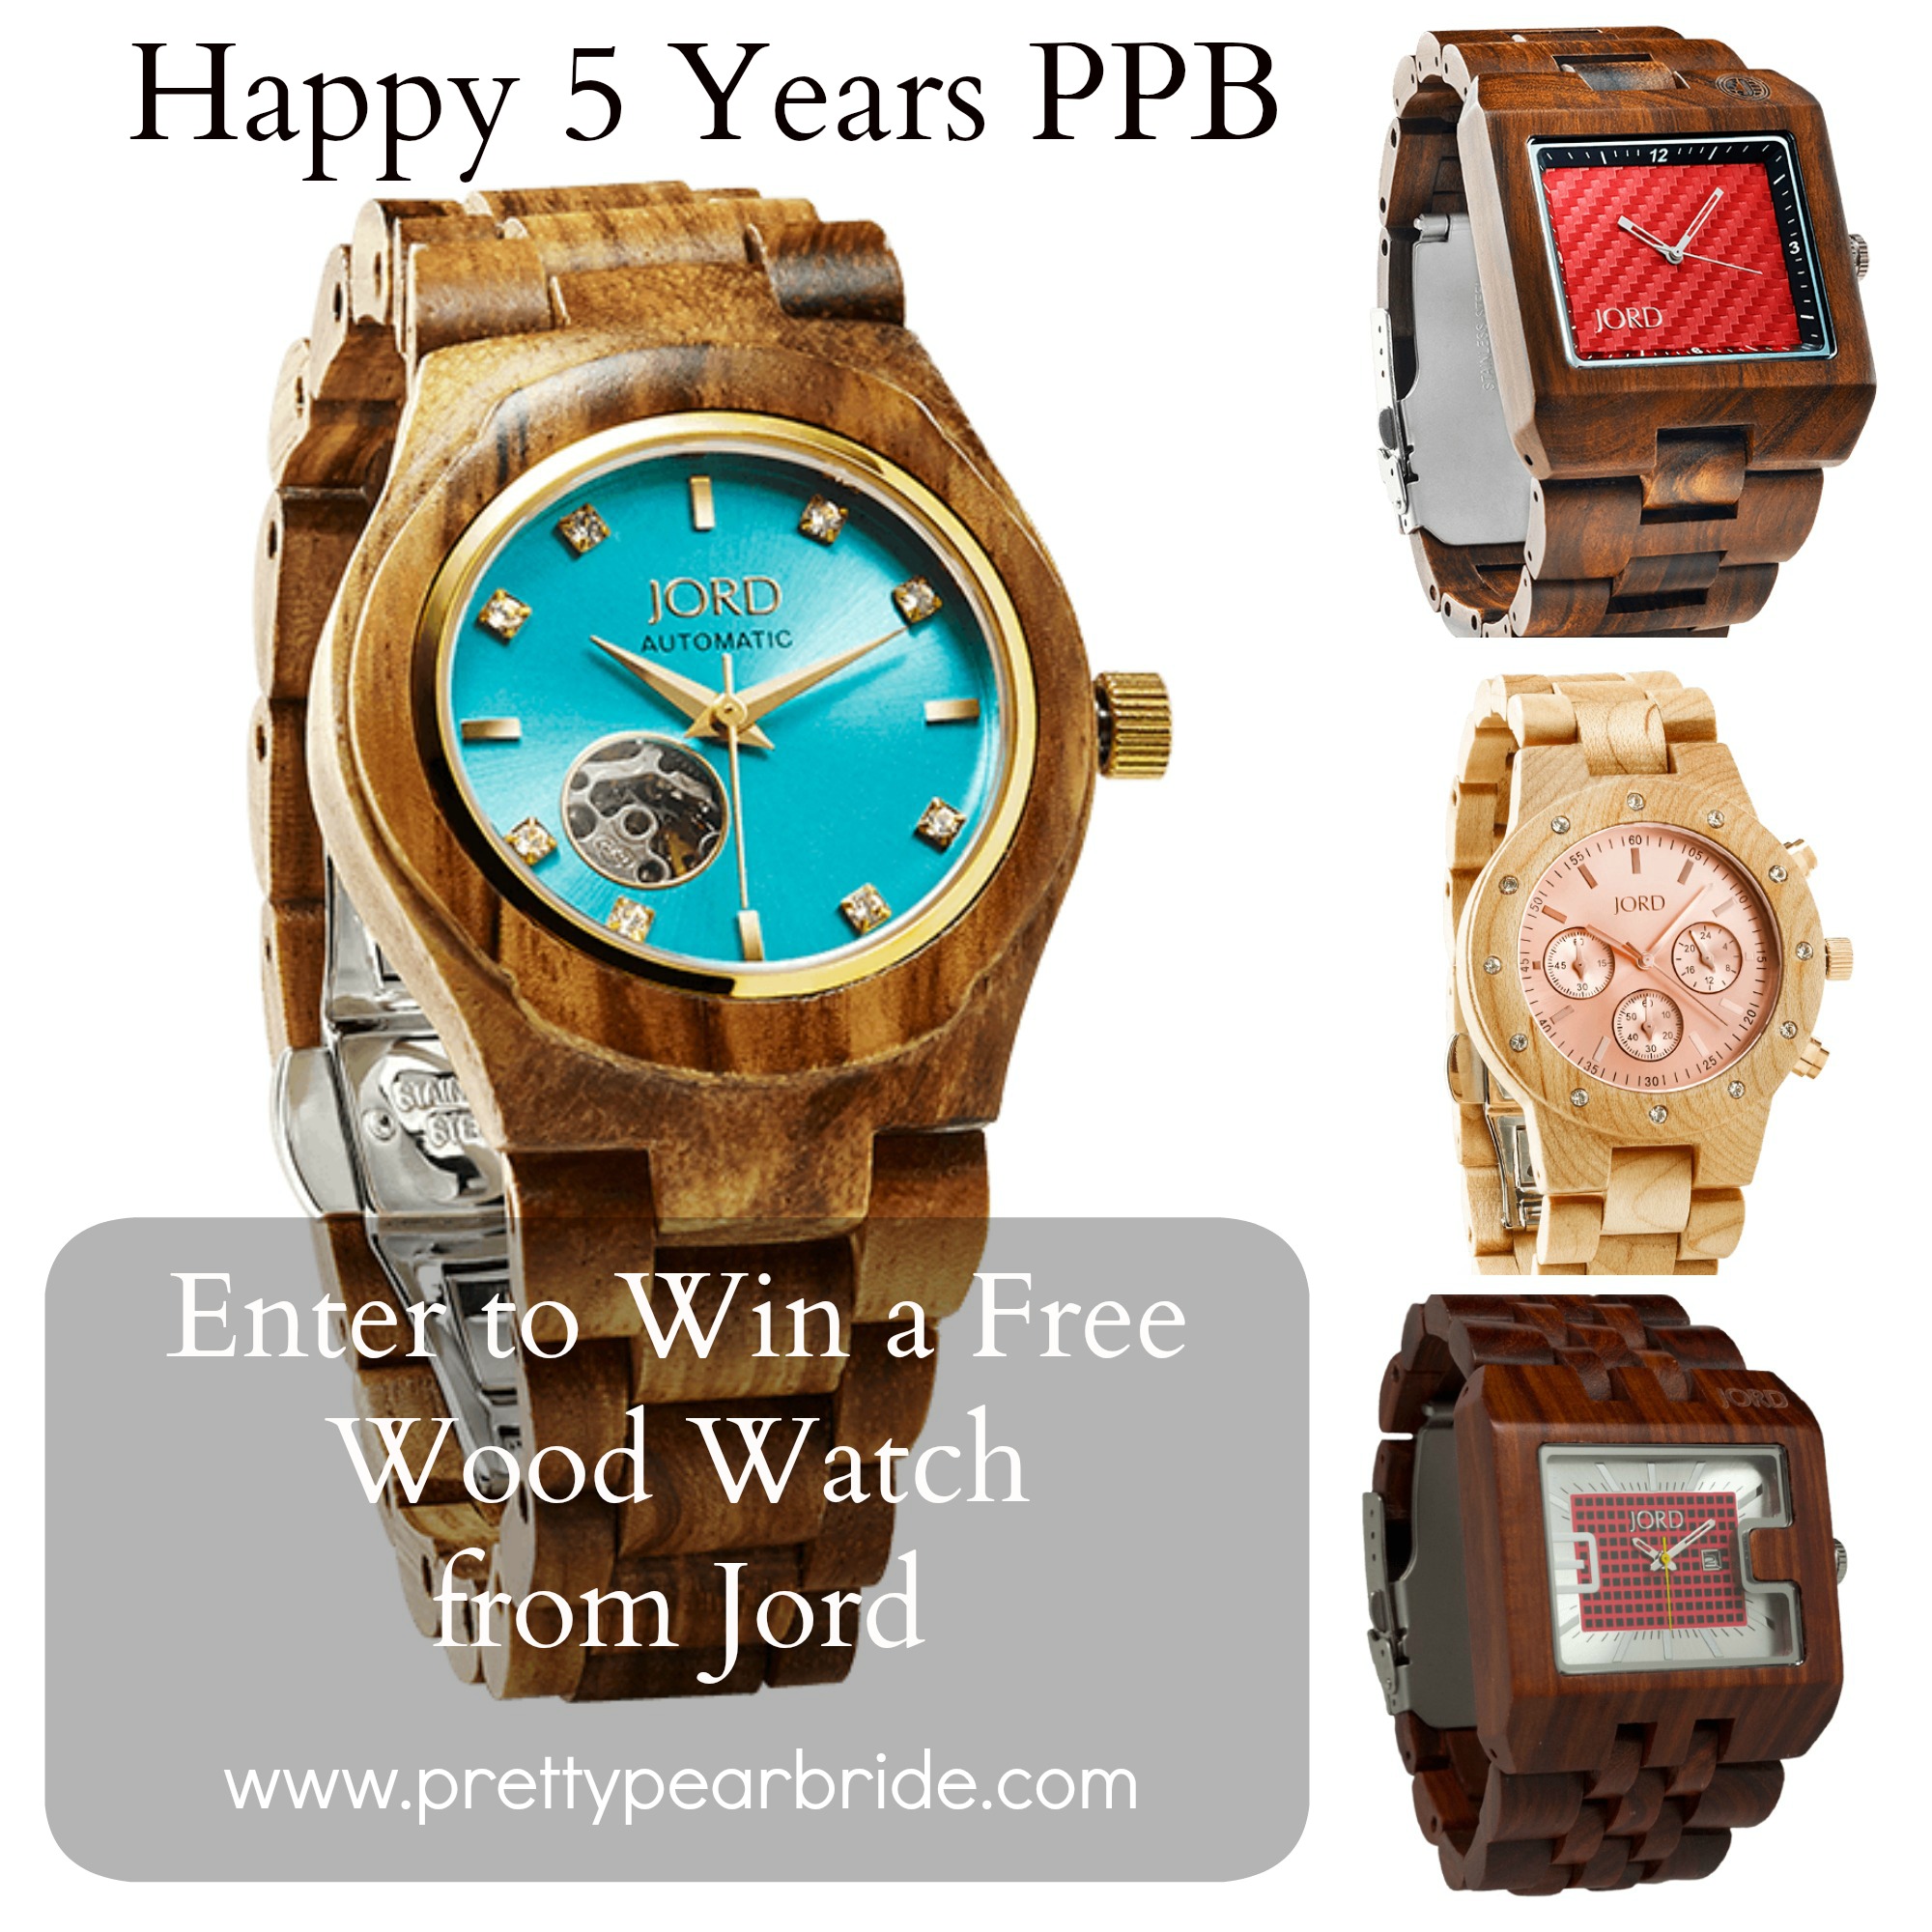 {Contest} Win a Wooden Watch from Jord Watches